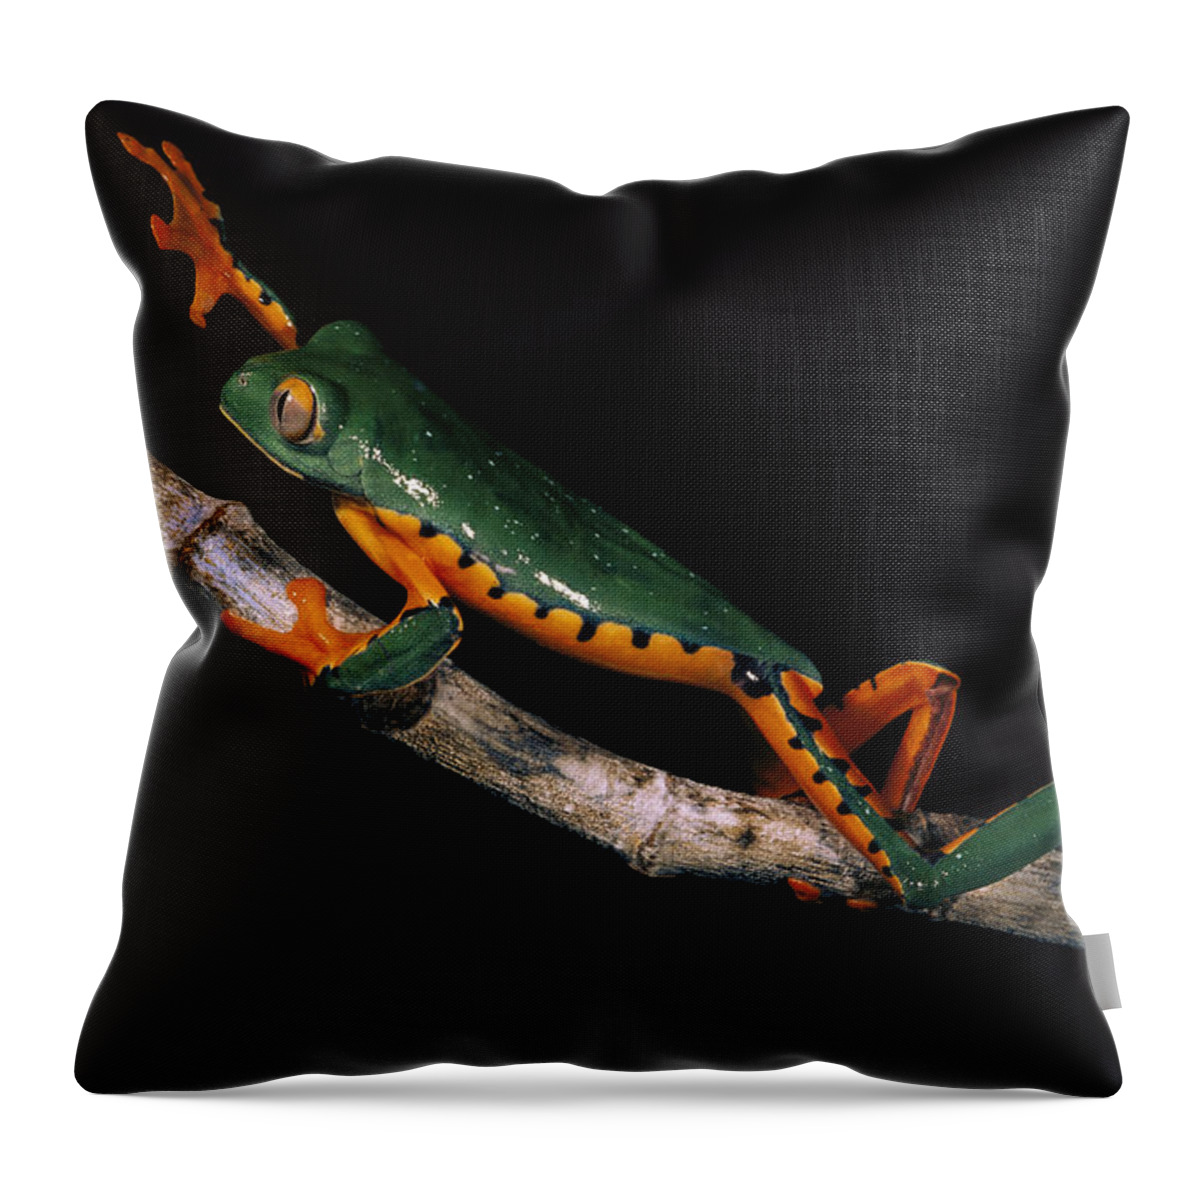 00217037 Throw Pillow featuring the photograph Splendid Leaf Frog Ecuador #2 by Pete Oxford